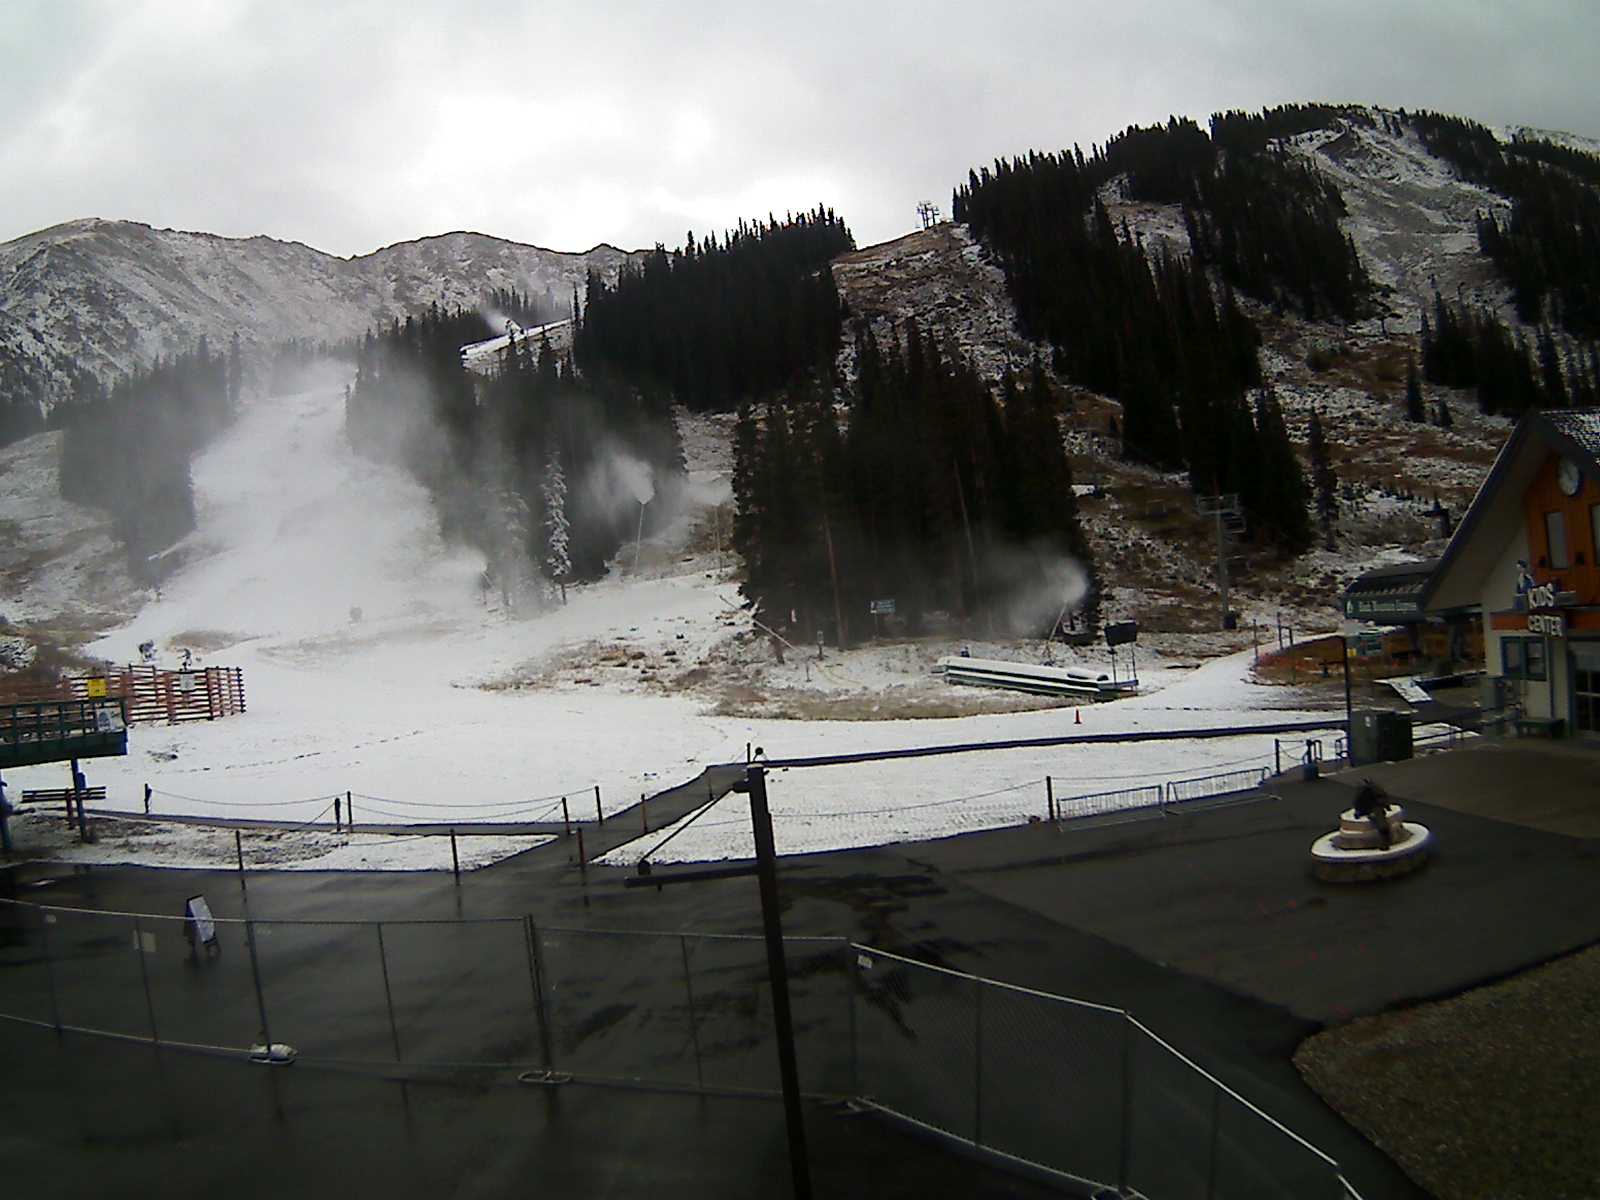 Arapahoe Basin, CO today at 11:30am MST.